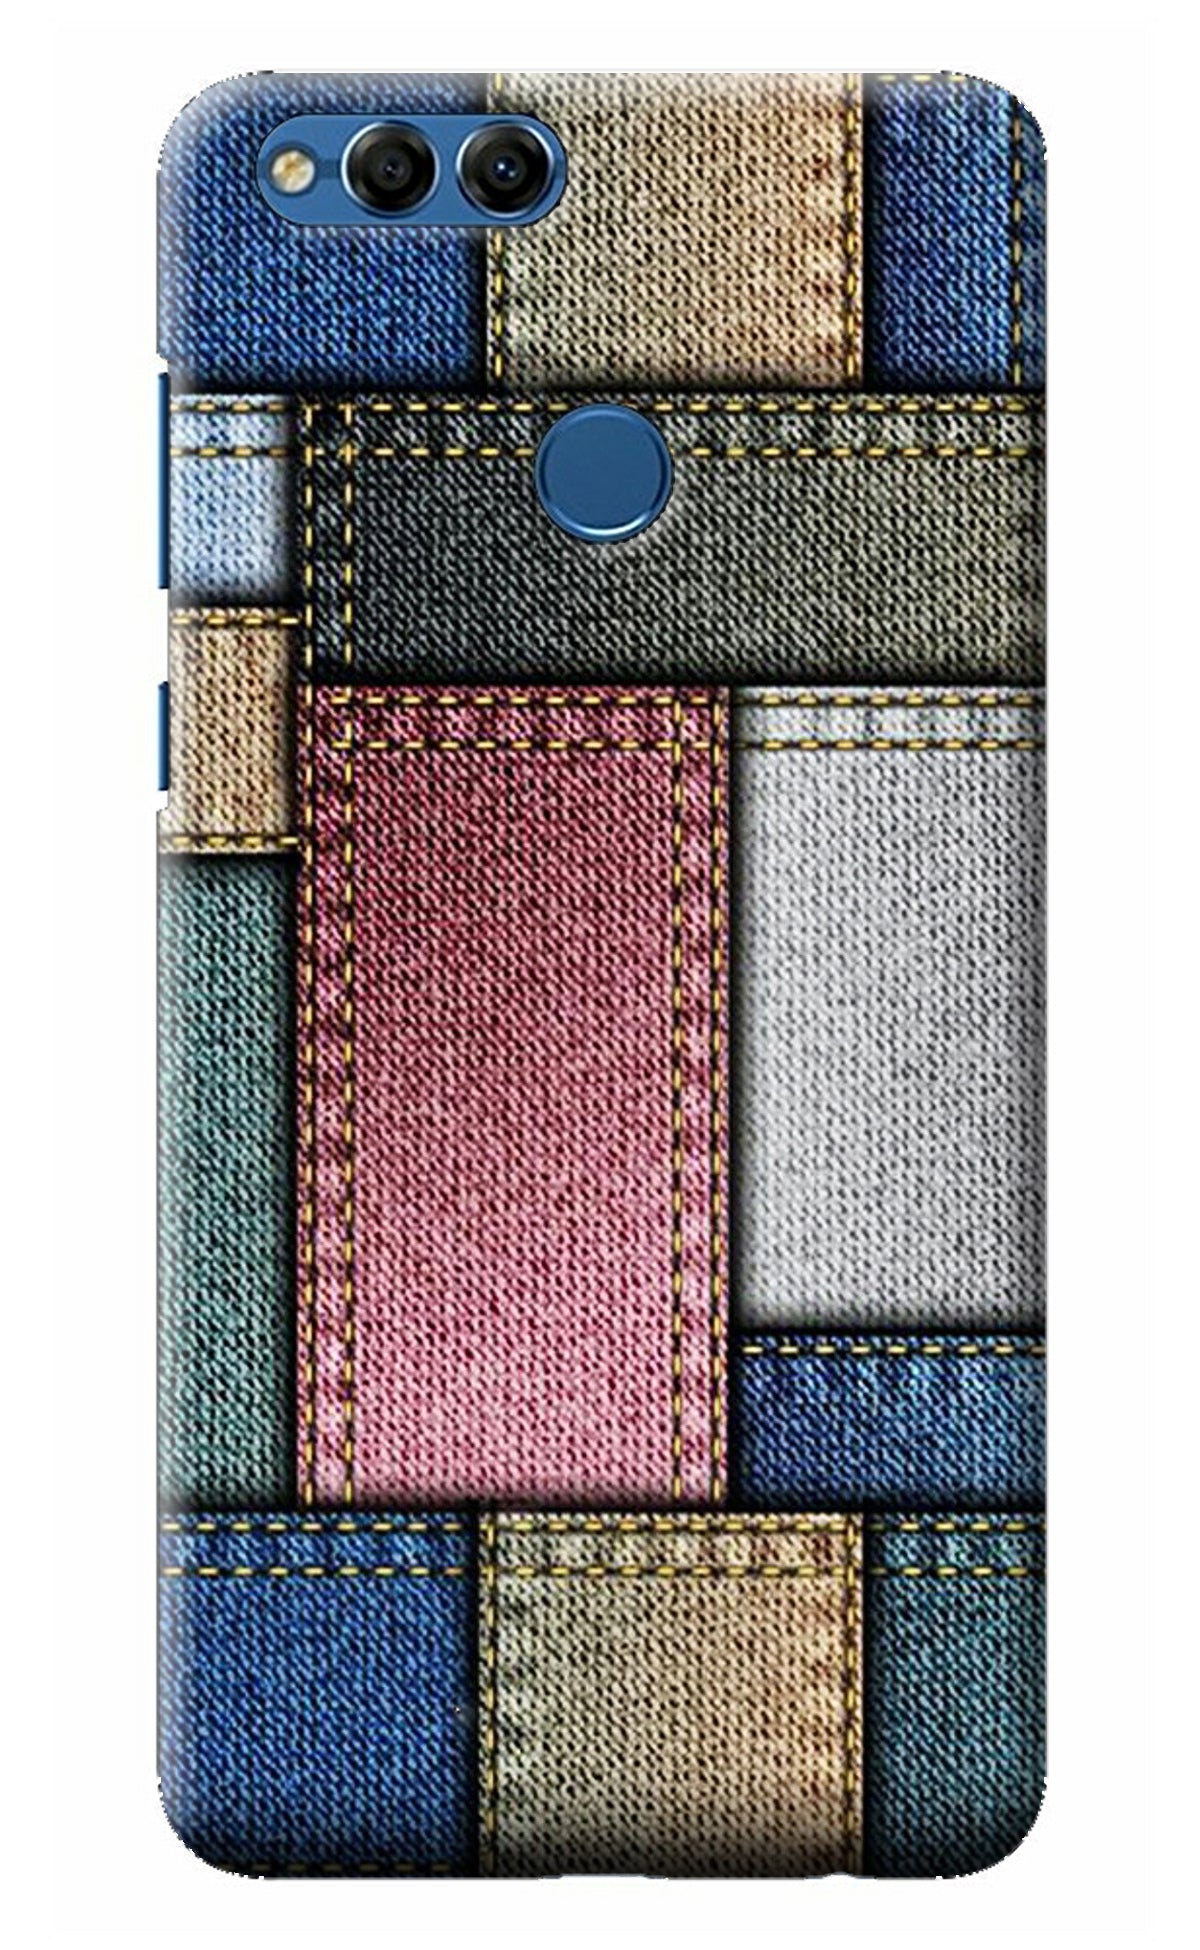 Multicolor Jeans Honor 7X Back Cover